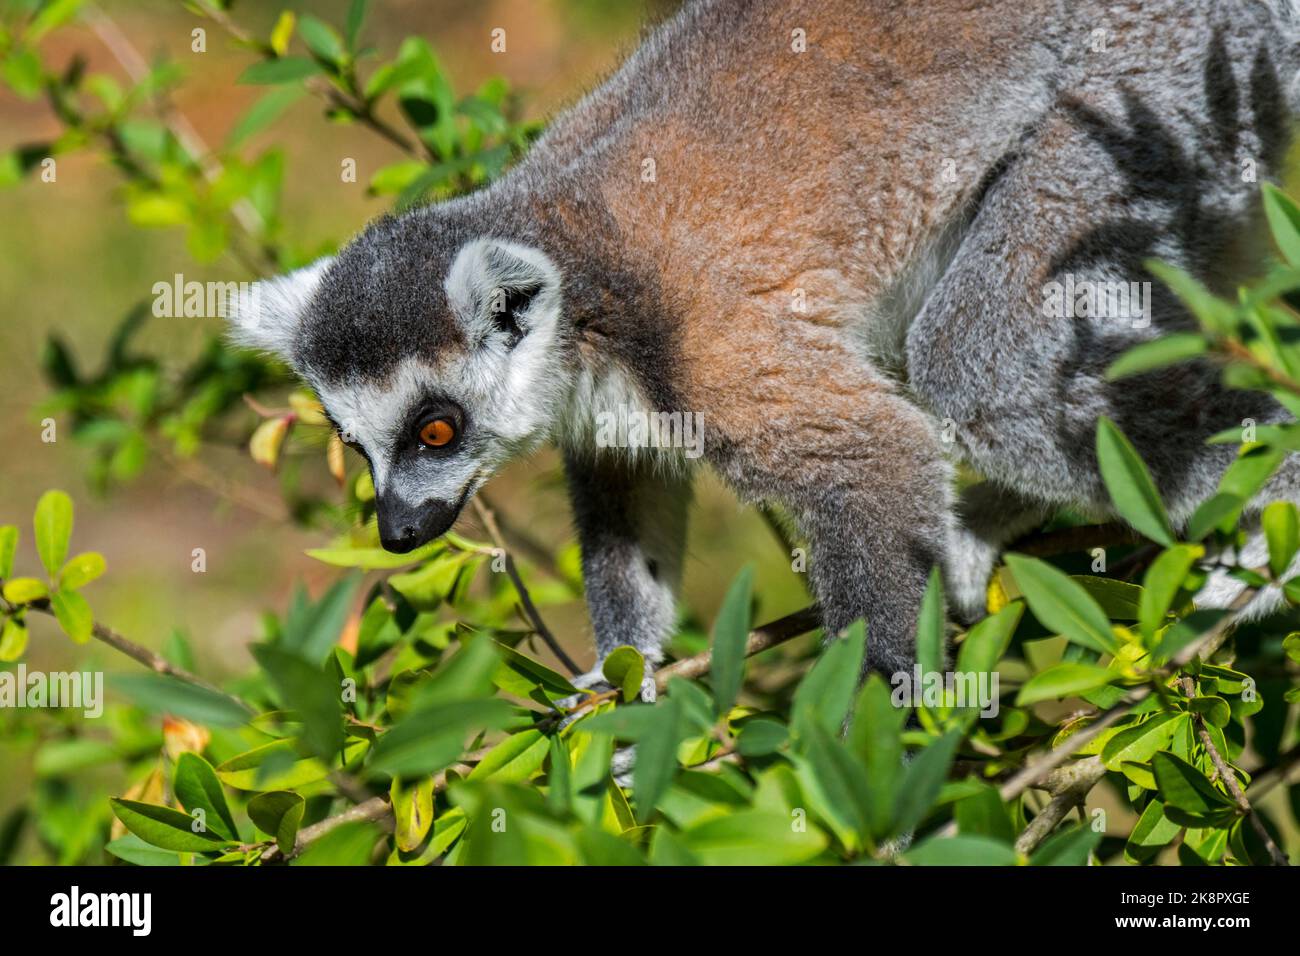 Ring-tailed lemur (Lemur catta) foraging in tree, endangered primate endemic to the island of Madagascar, Africa Stock Photo